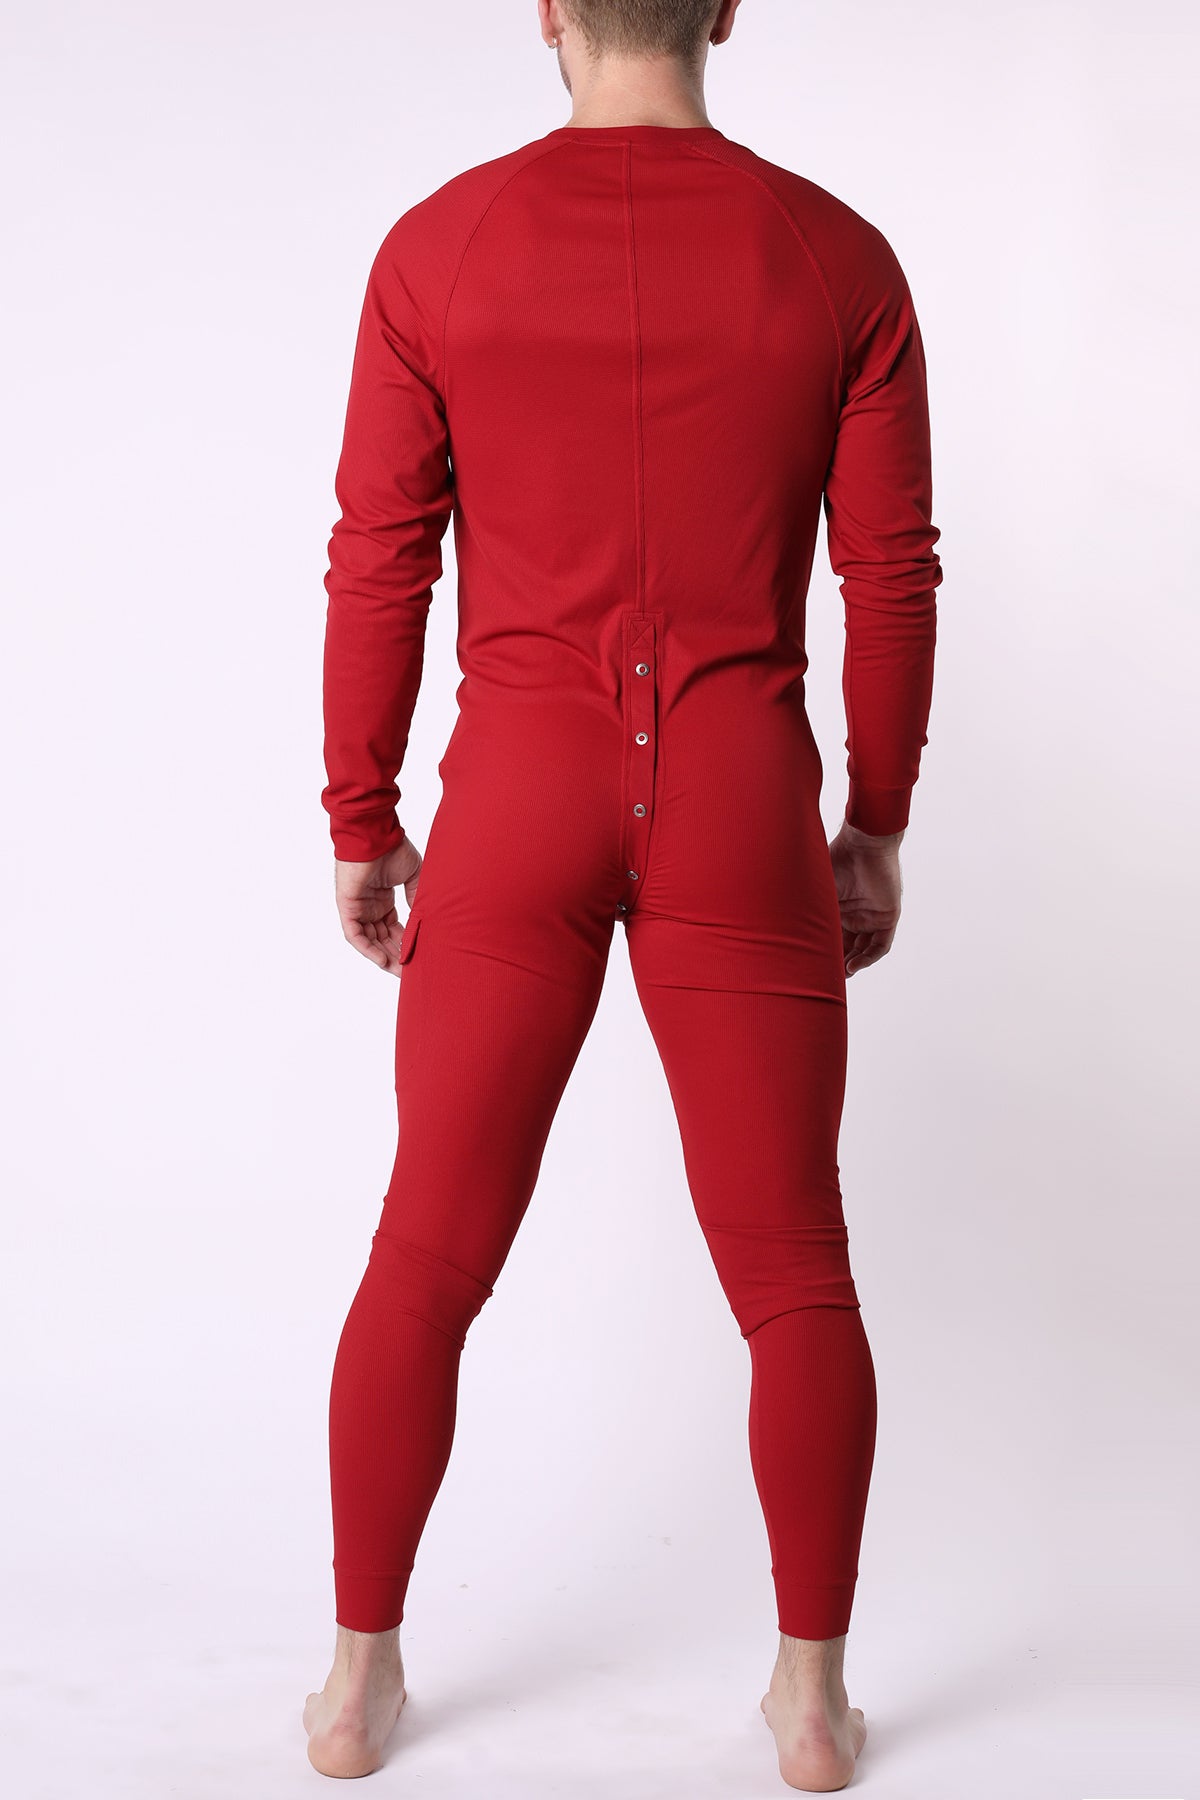 Mens Bodysuit T-shirt Thong Style Long Sleeves Union Suit Fully